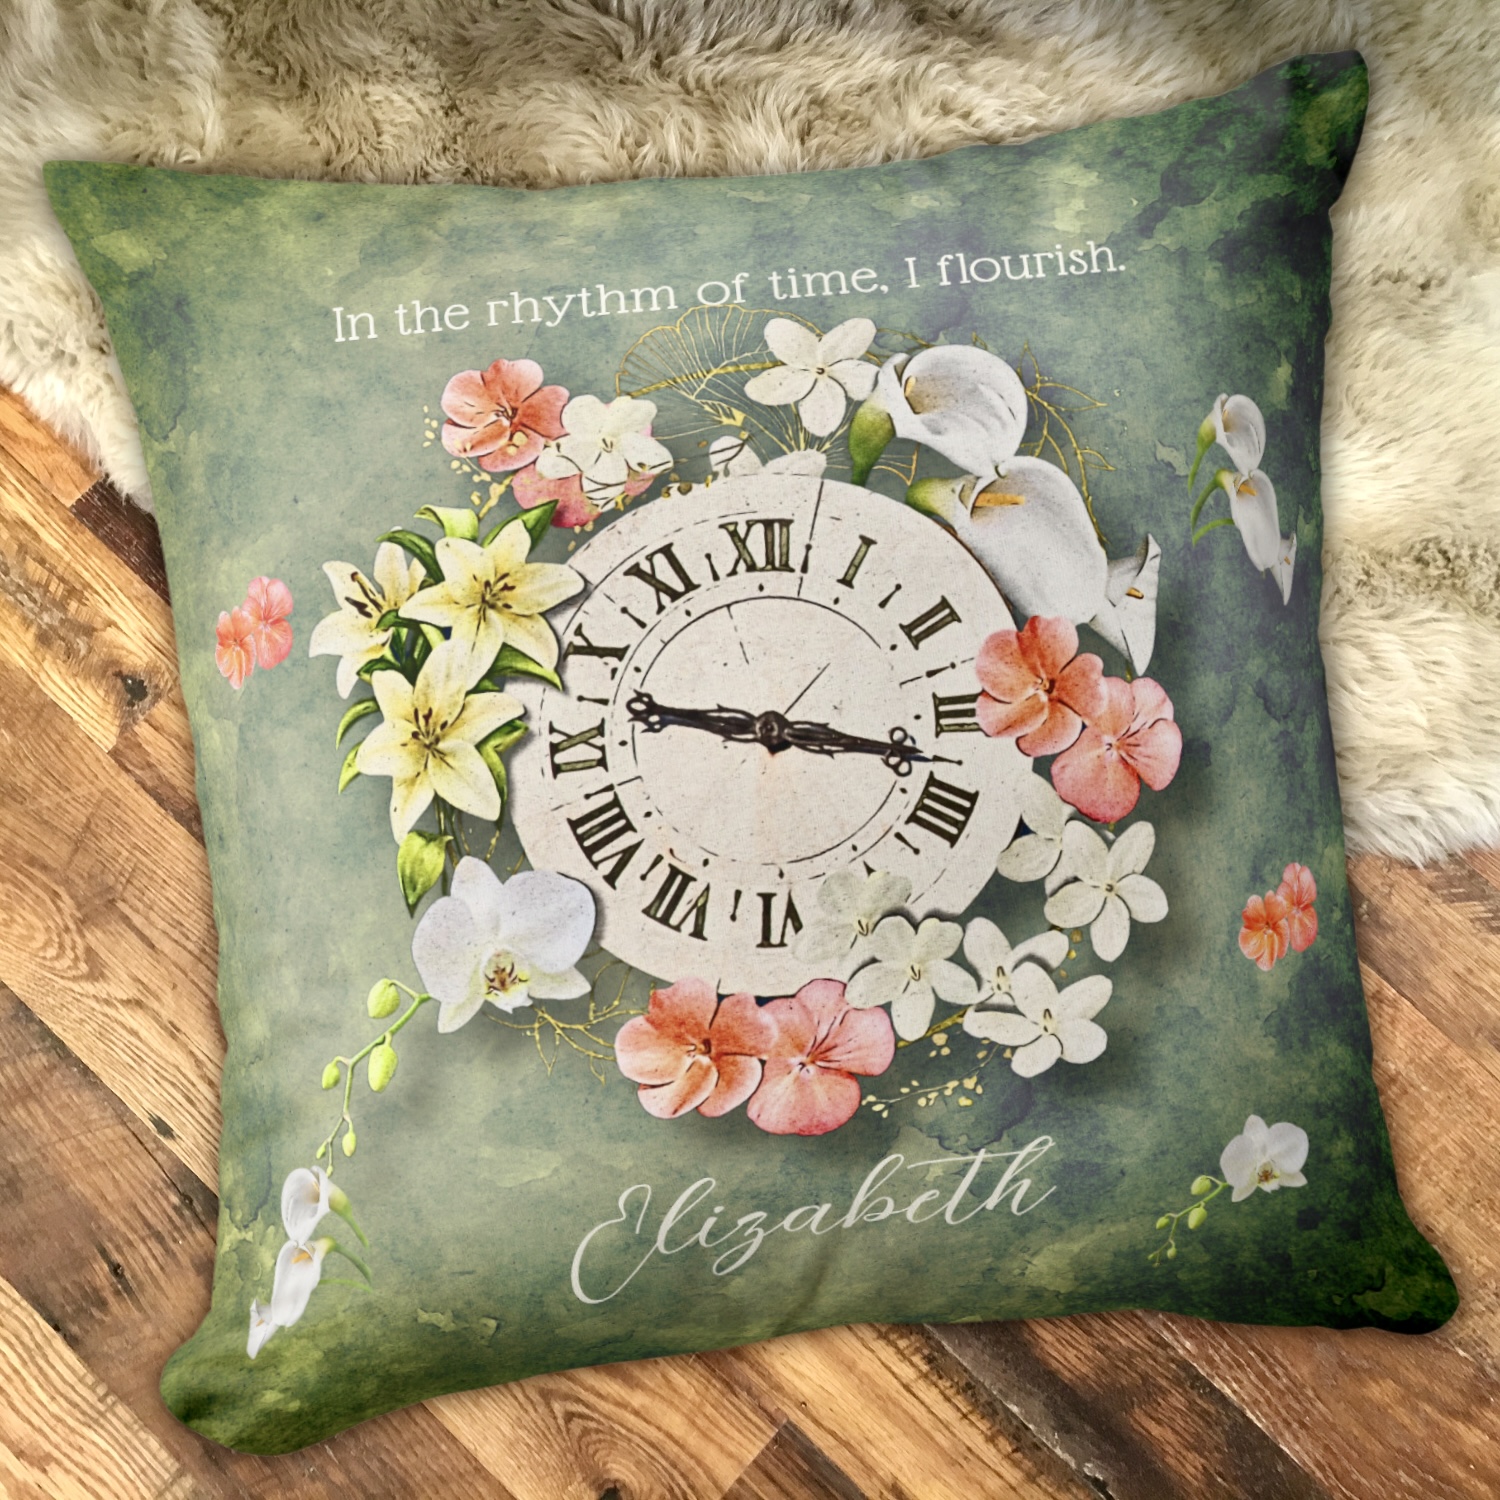 Moss green throw pillow with a vintage clock surrounded by soft color flowers, an inspirational message on the top and a name space at the bottom.